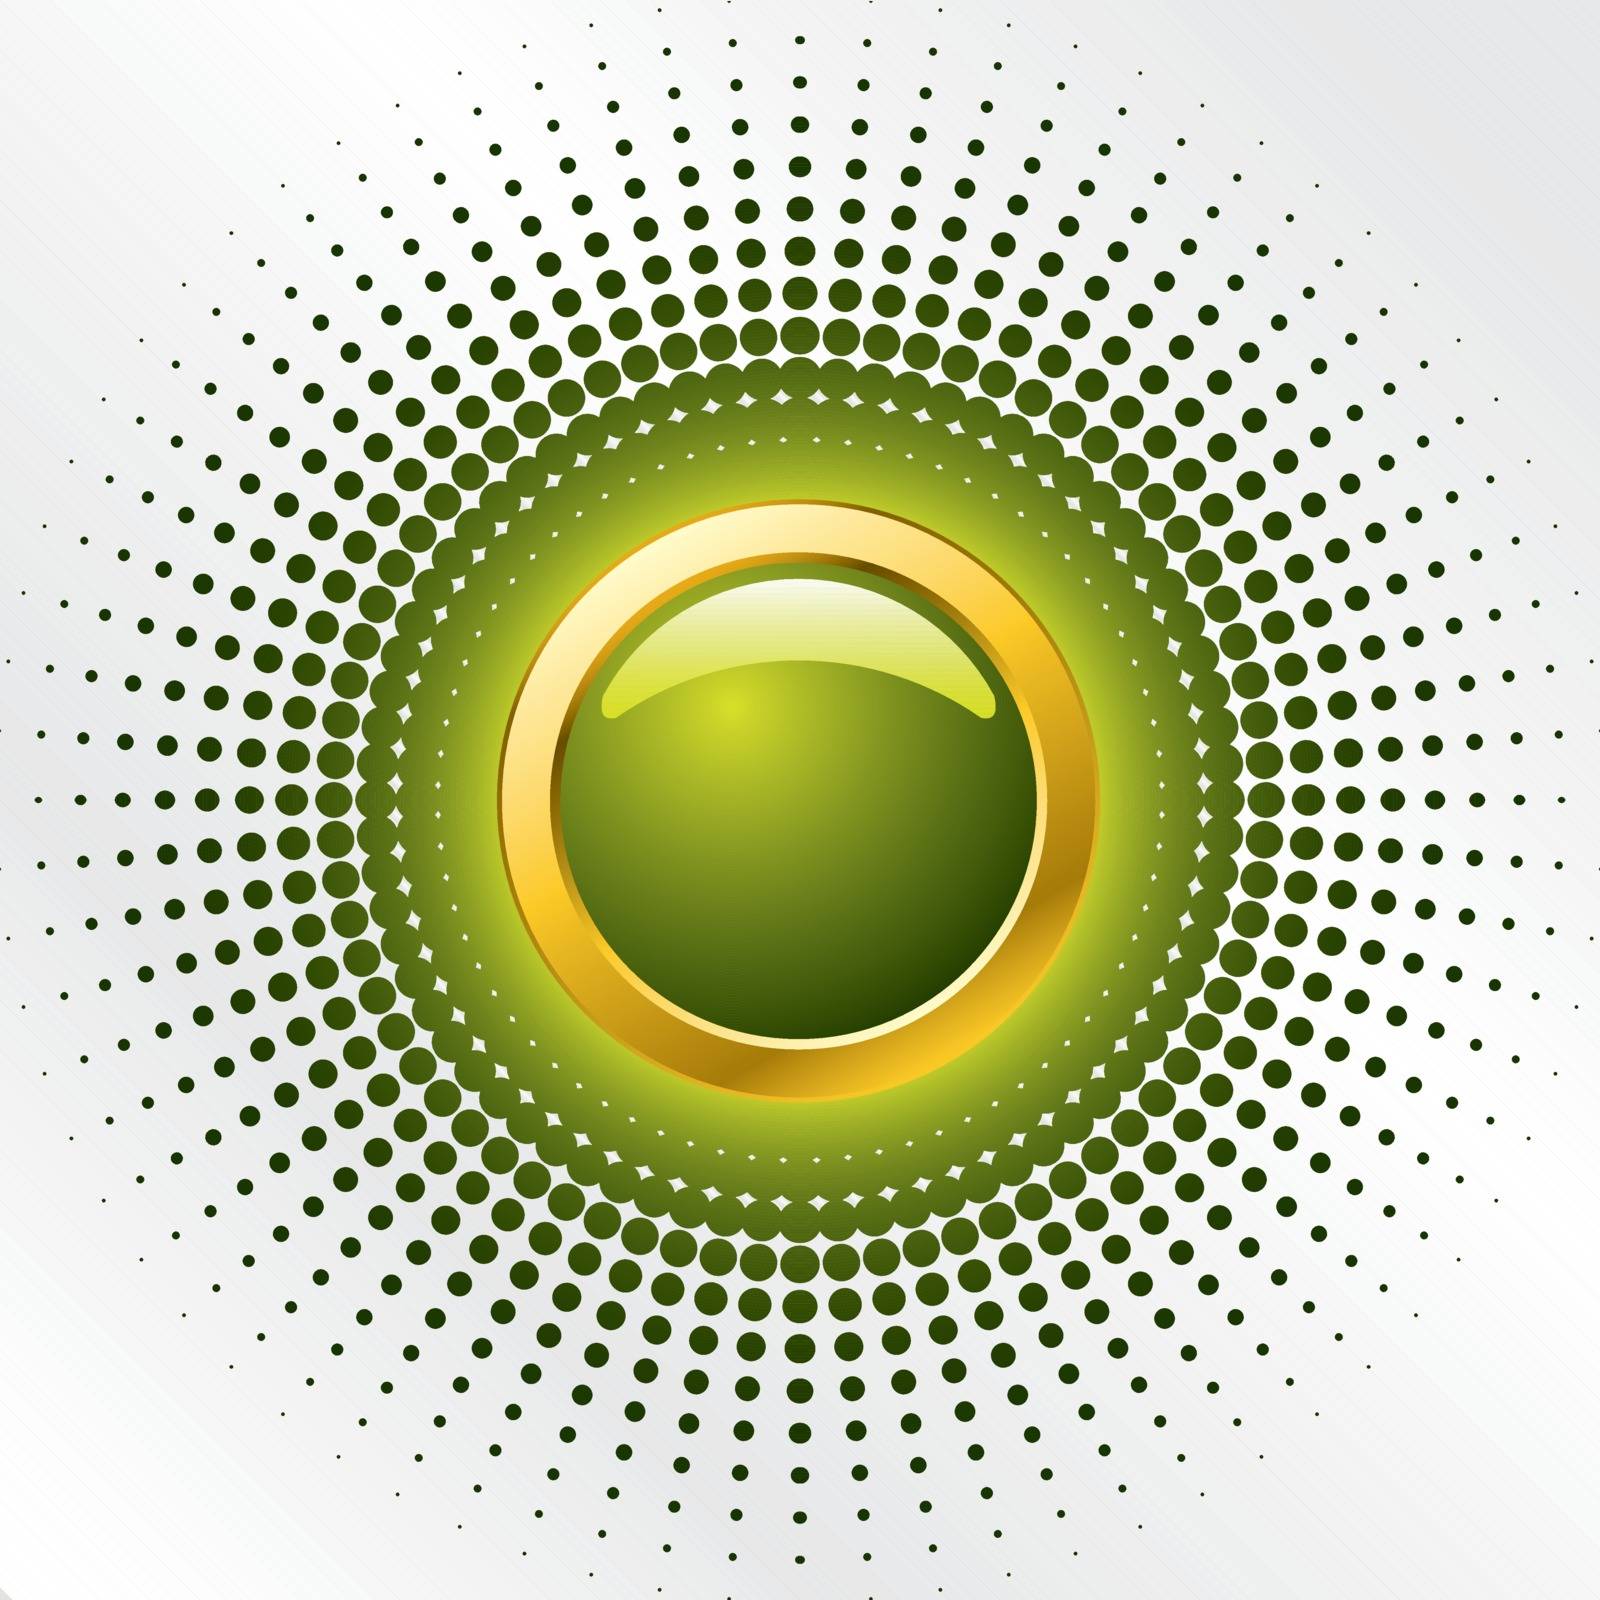 Green gold button with halftone grayish background 